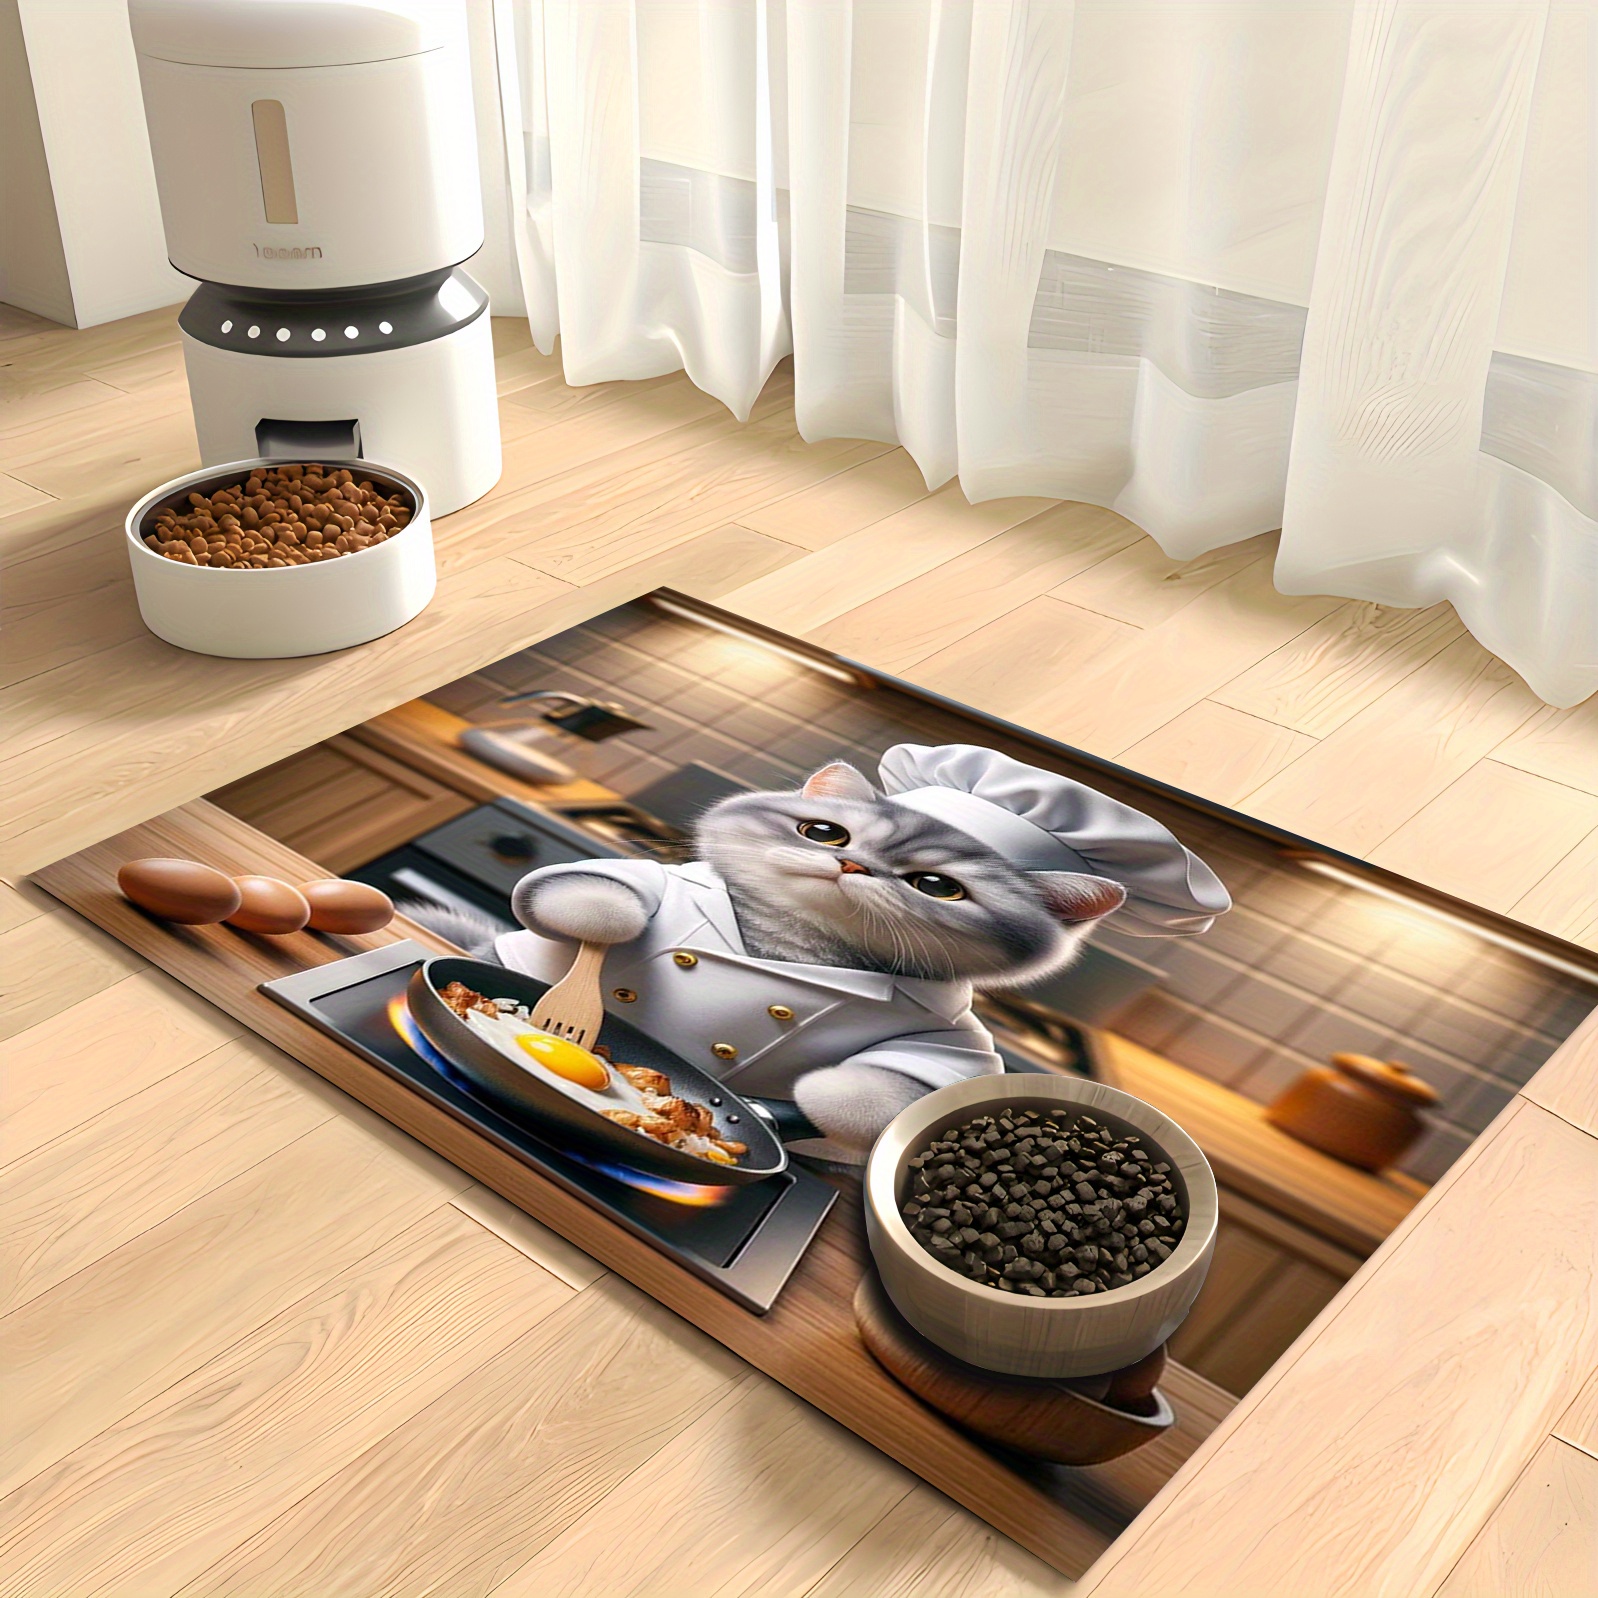 

purrfect Meal" 1pc Creative Cat Chef Print Pet Feeding Mat - Absorbent, Leak-proof, Easy Clean For Cats & Dogs